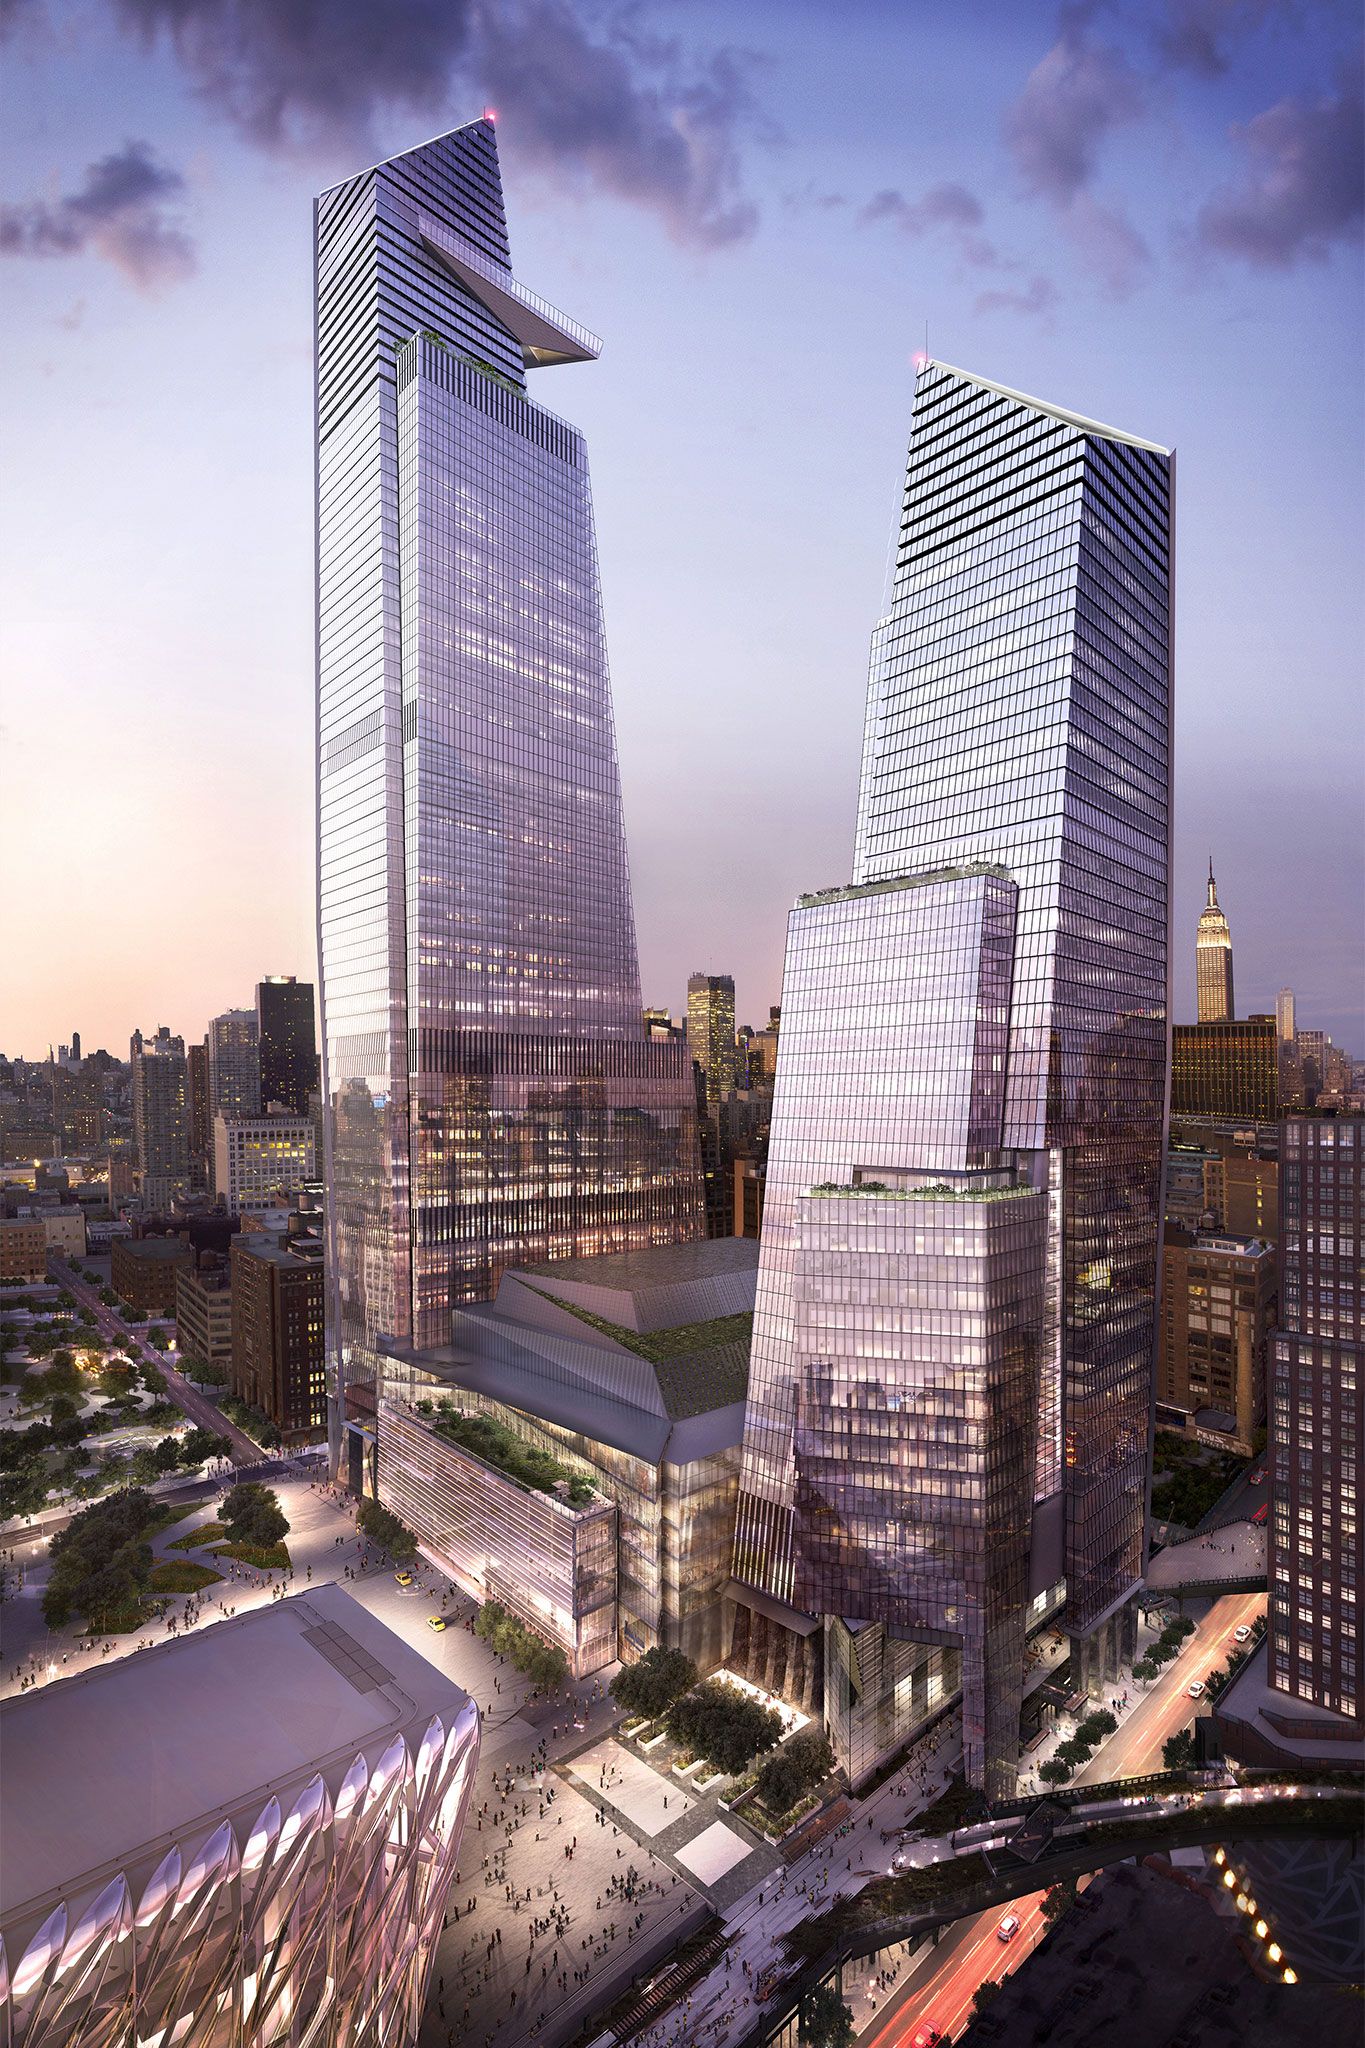 From left: 30 Hudson Yards, the shops and 10 Hudson Yards